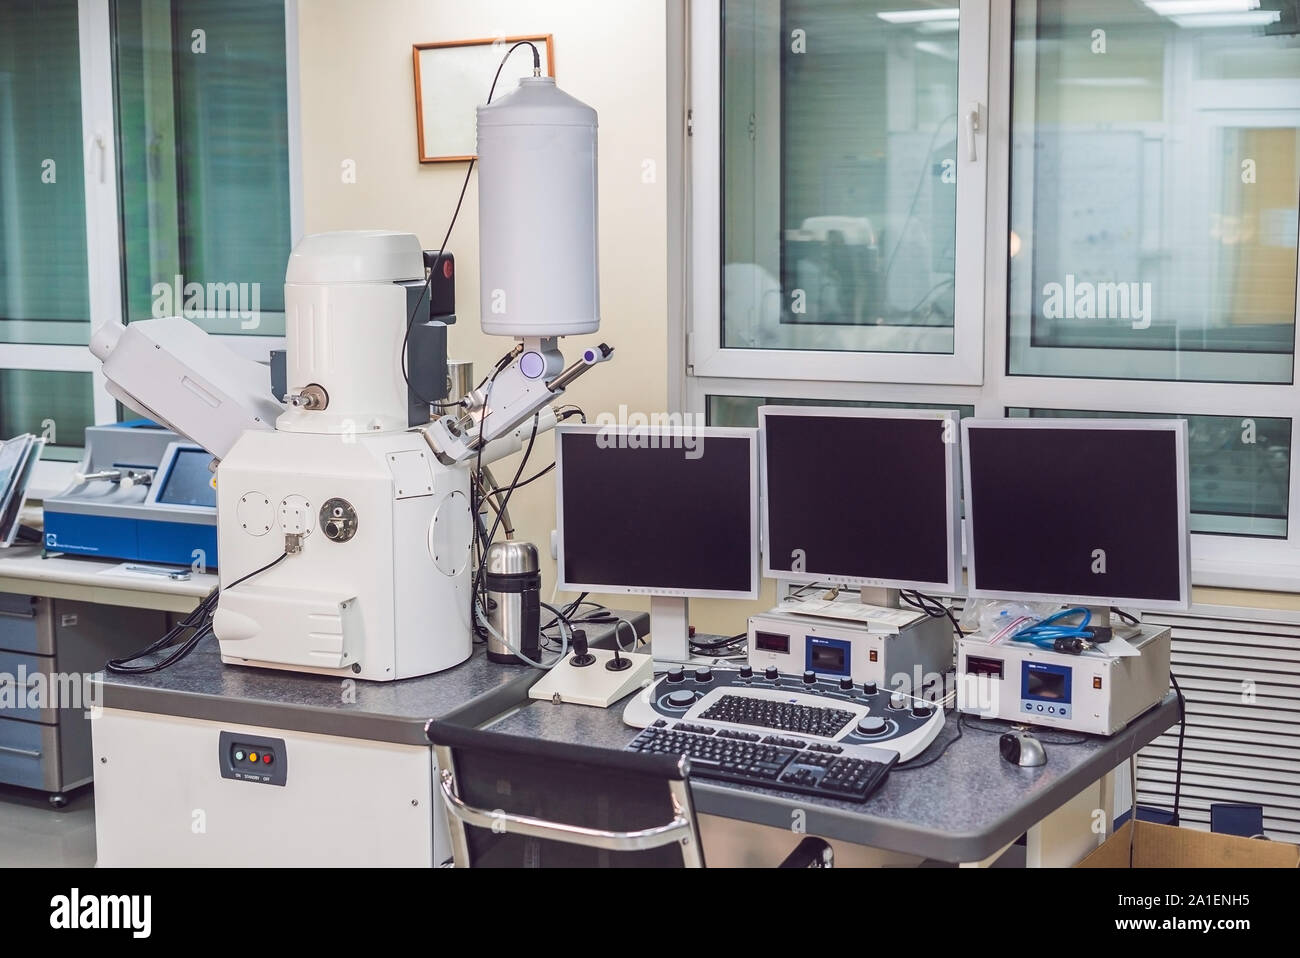 Scanning electron microscope microscope in a physical lab Stock Photo